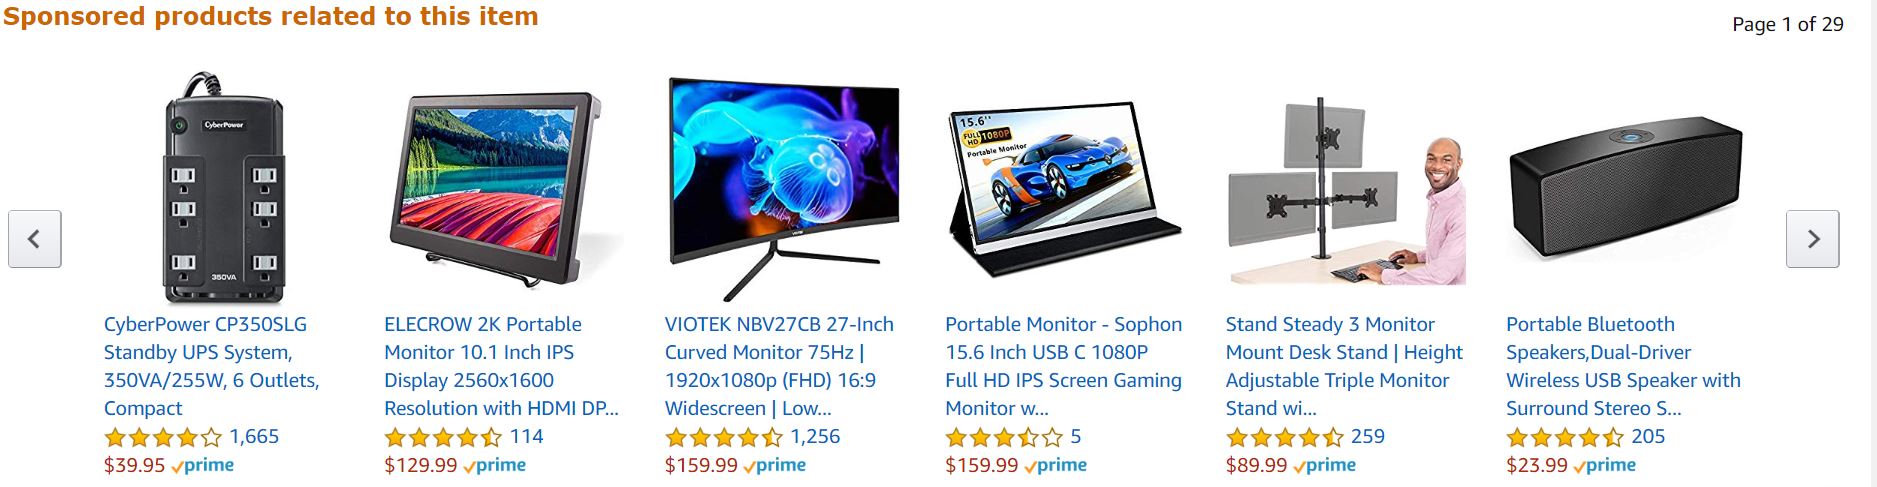 Amazon’s product recommendations: sponsored products related to the item